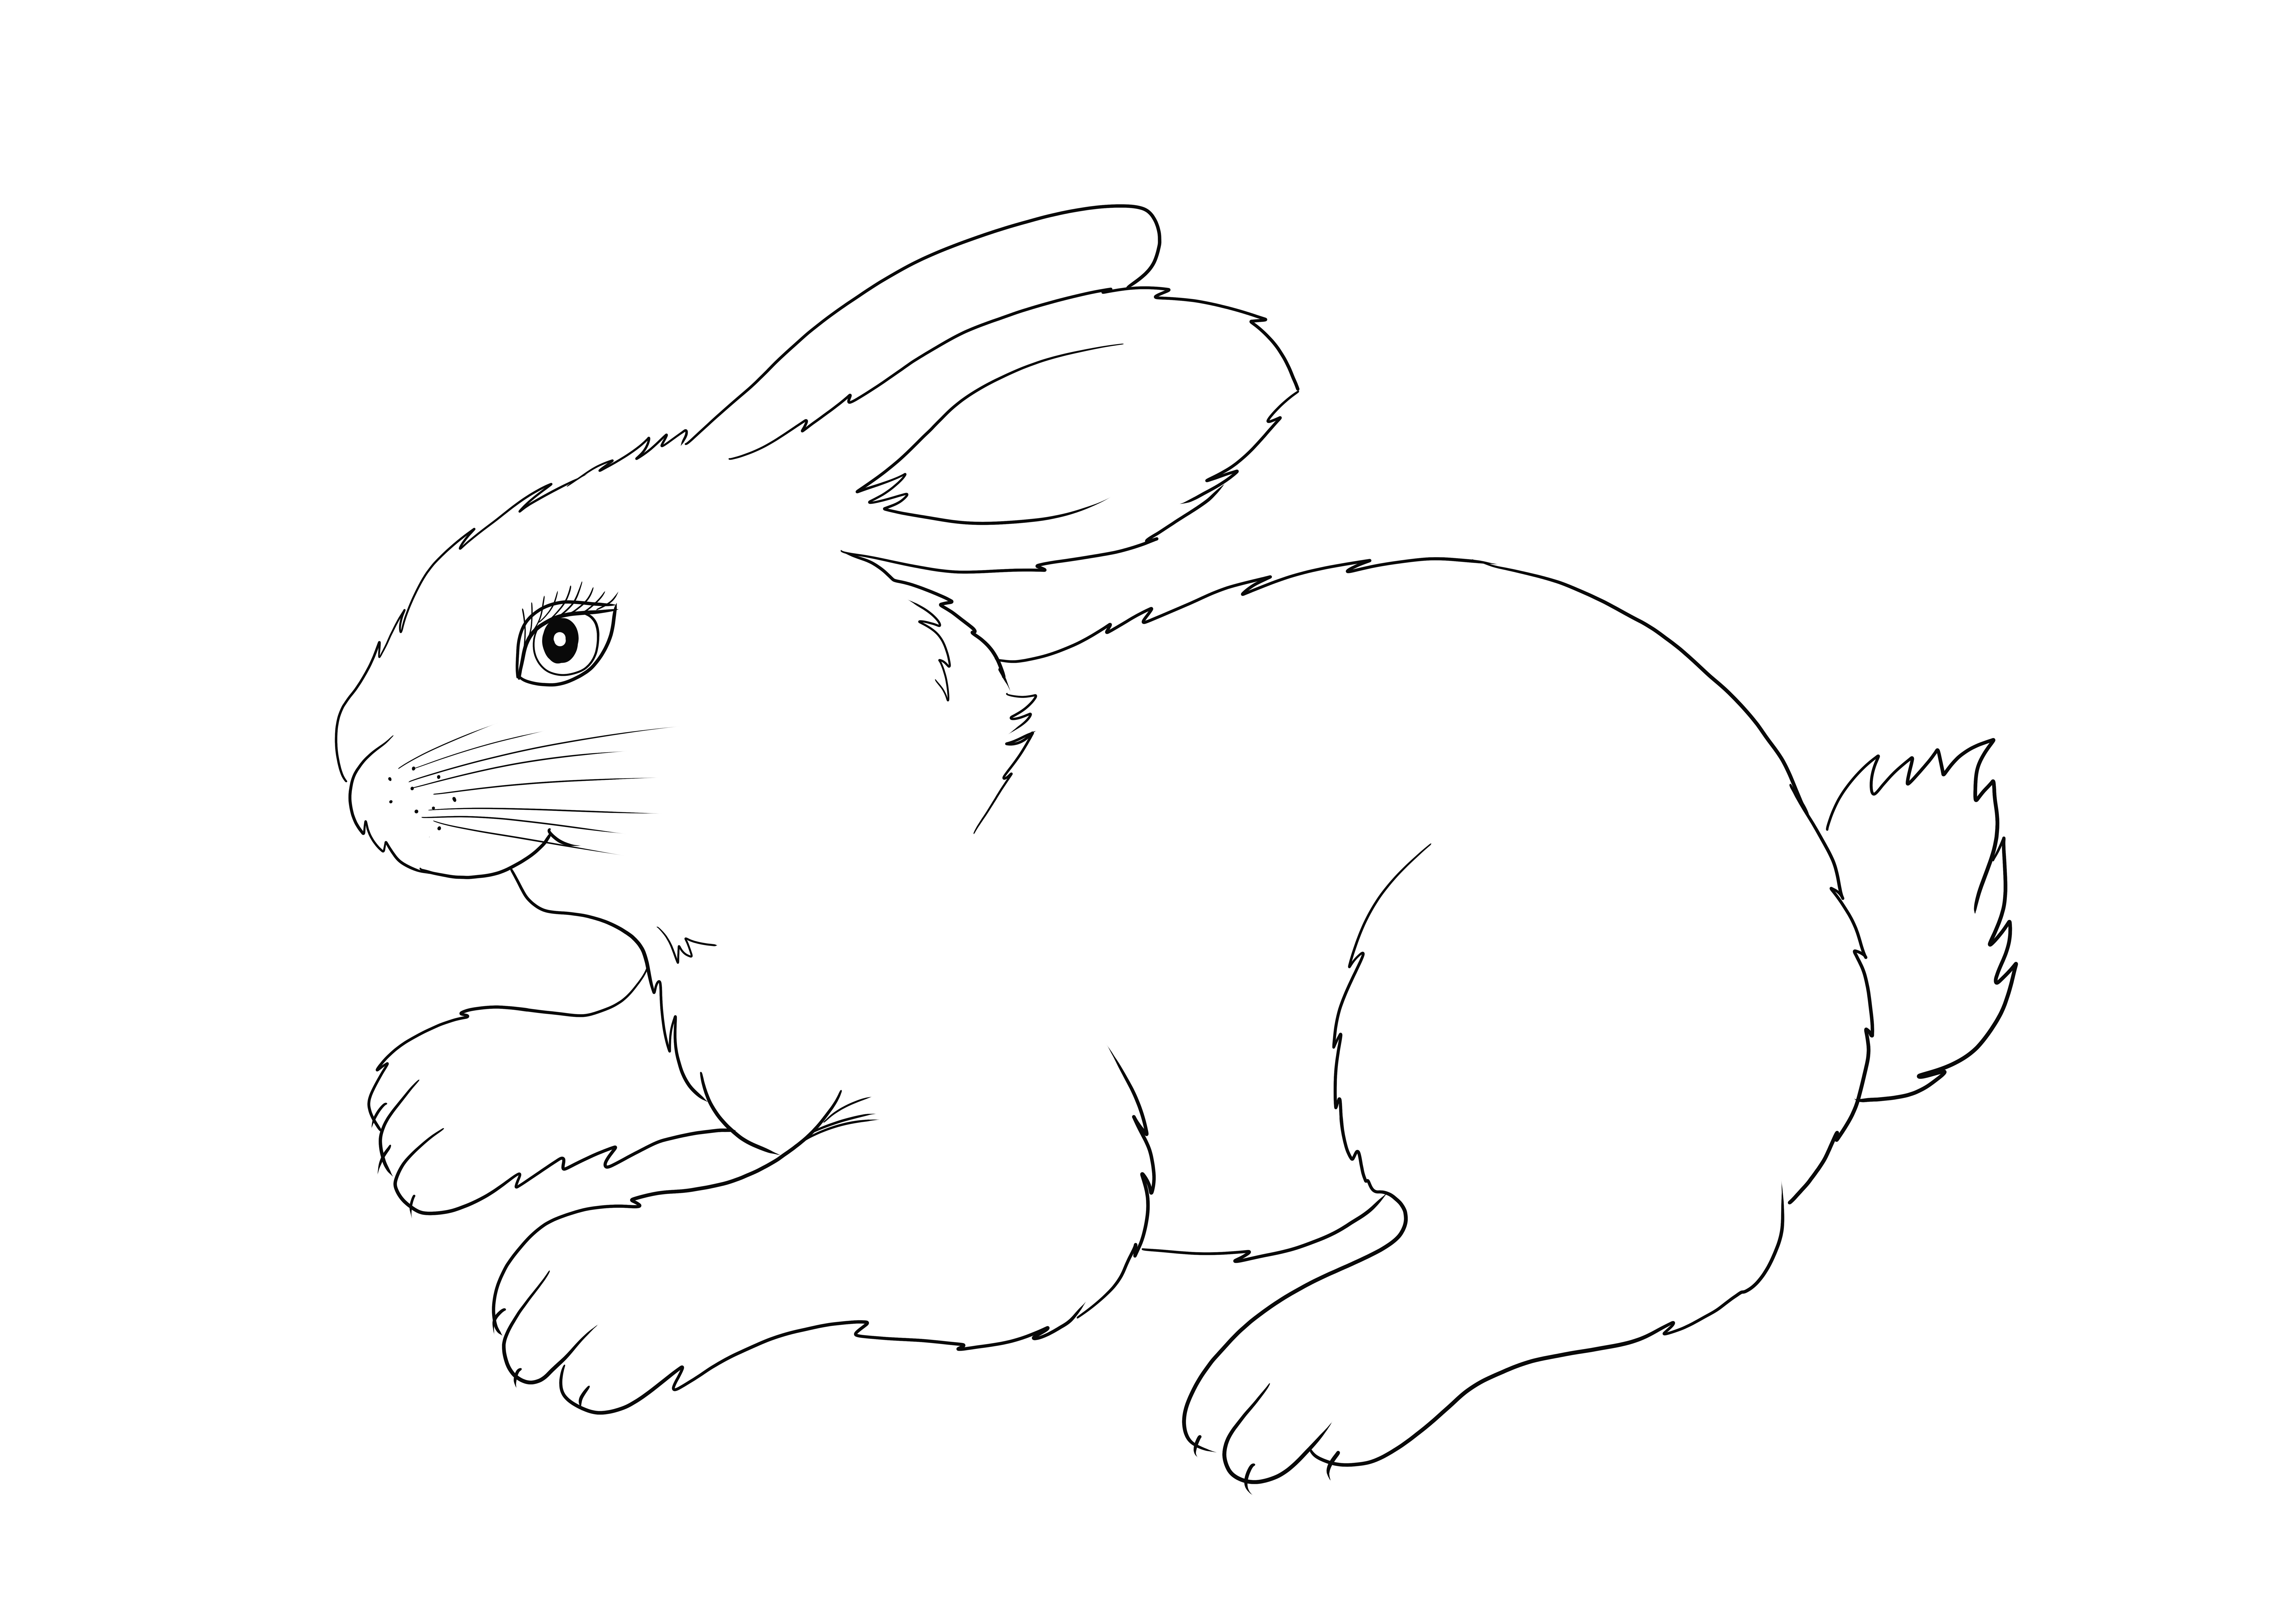 Our simple and easy coloring of a farm Rabbit image for all farm animal lovers